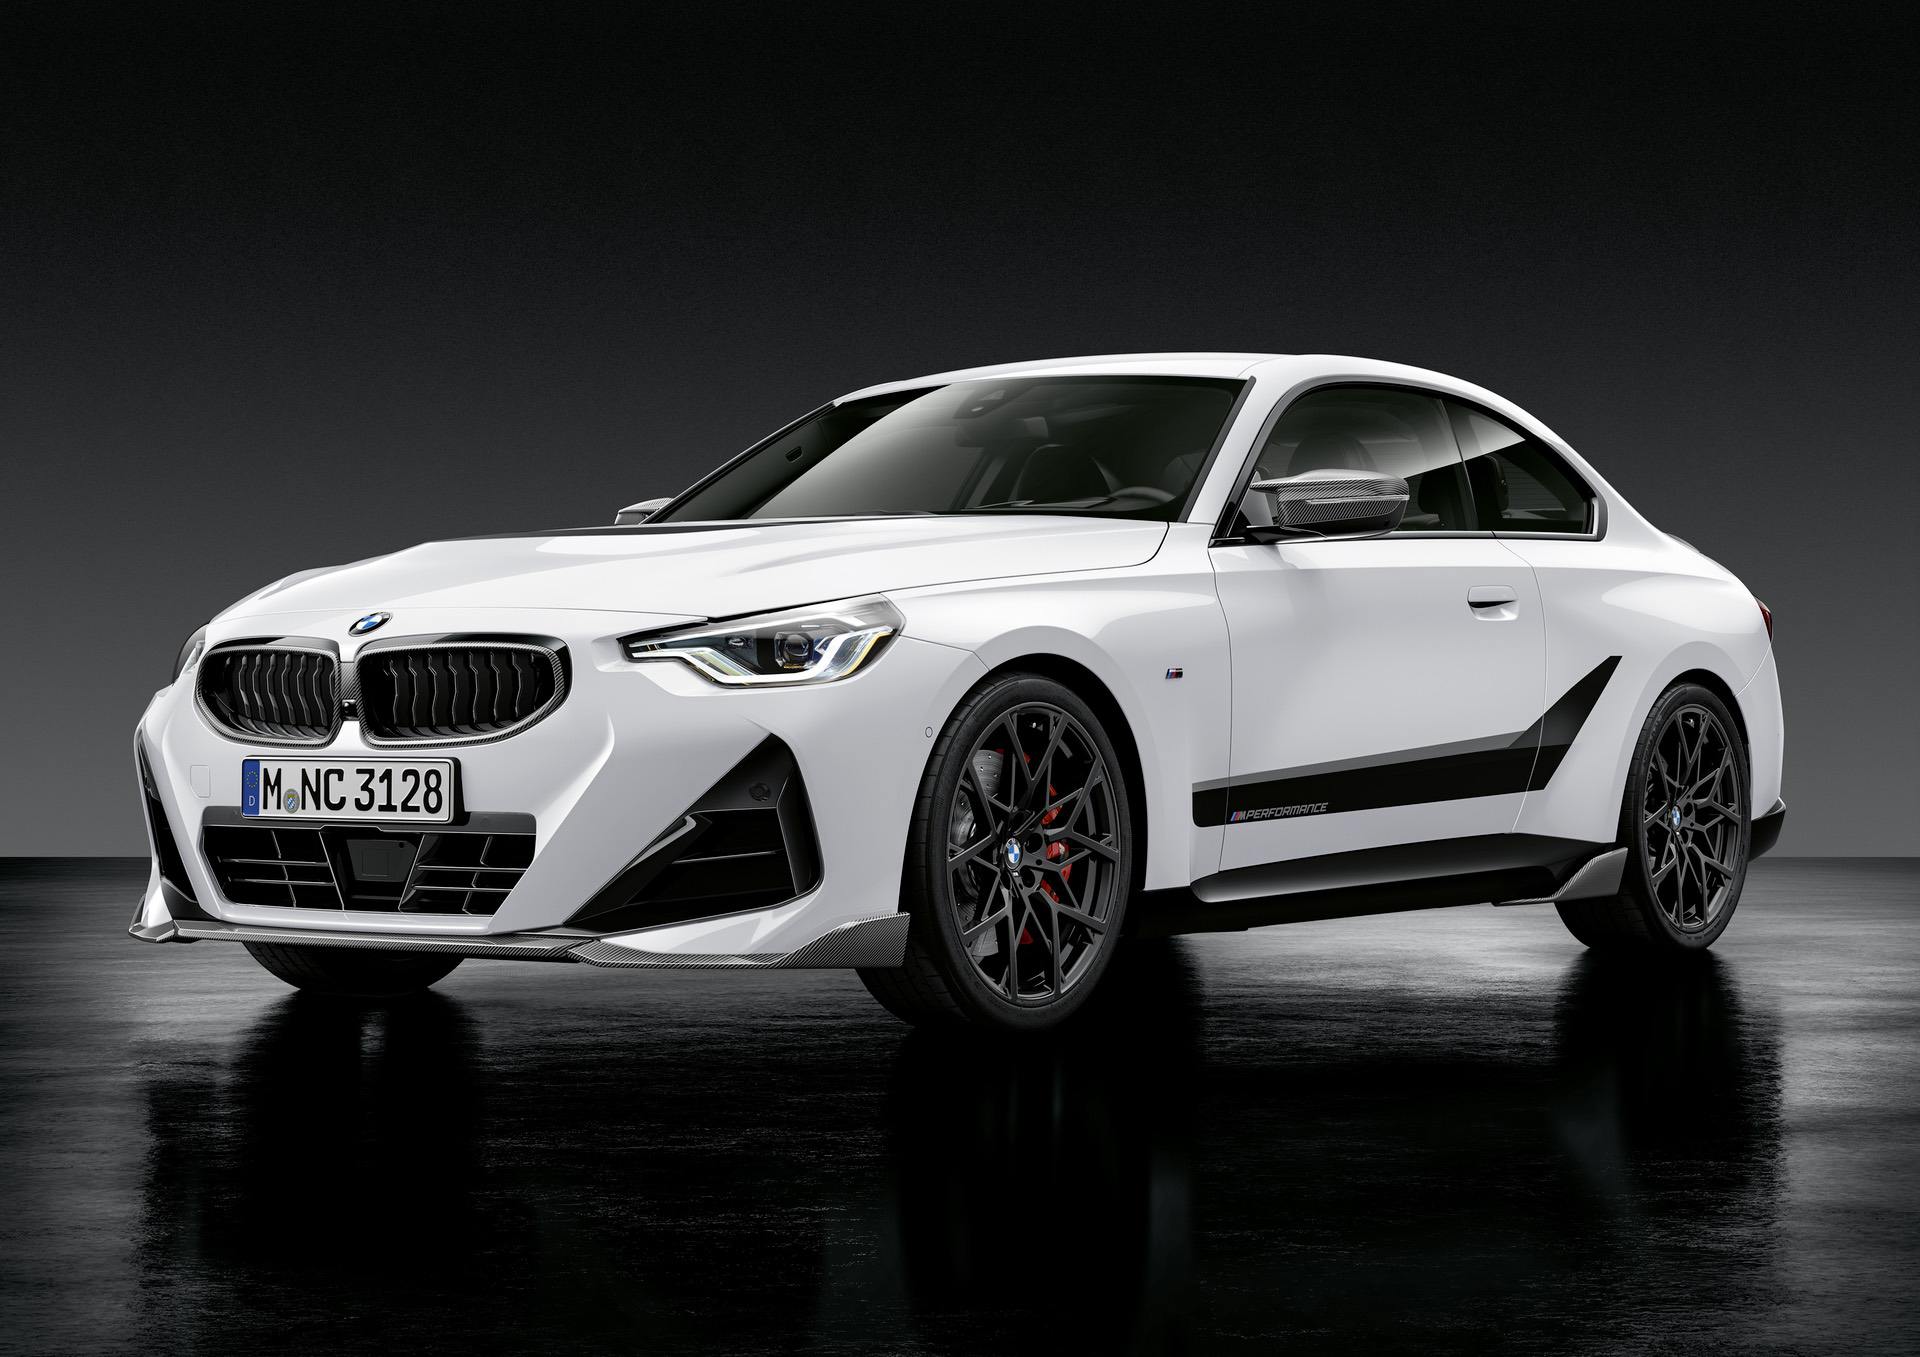 EXCLUSIVE: The M Performance Parts for the new BMW 2 Series Coupe